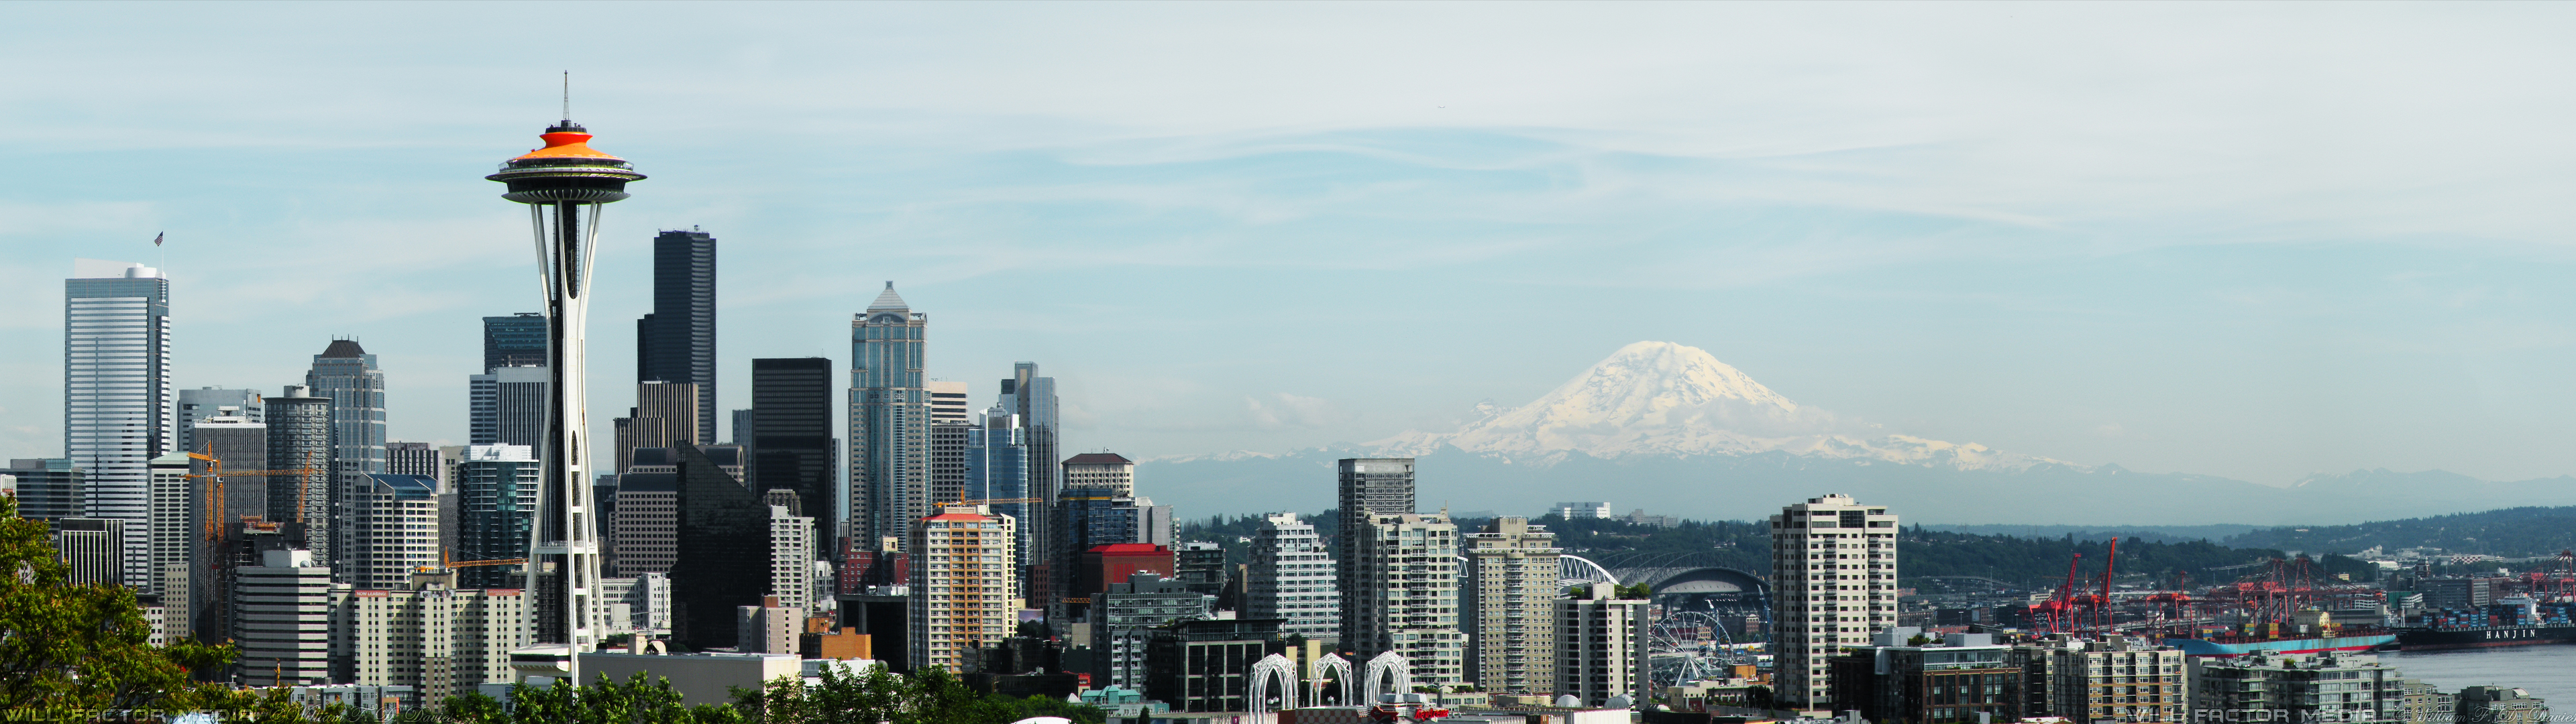 Dual Monitor Seattle Wallpaper By Willfactormedia On